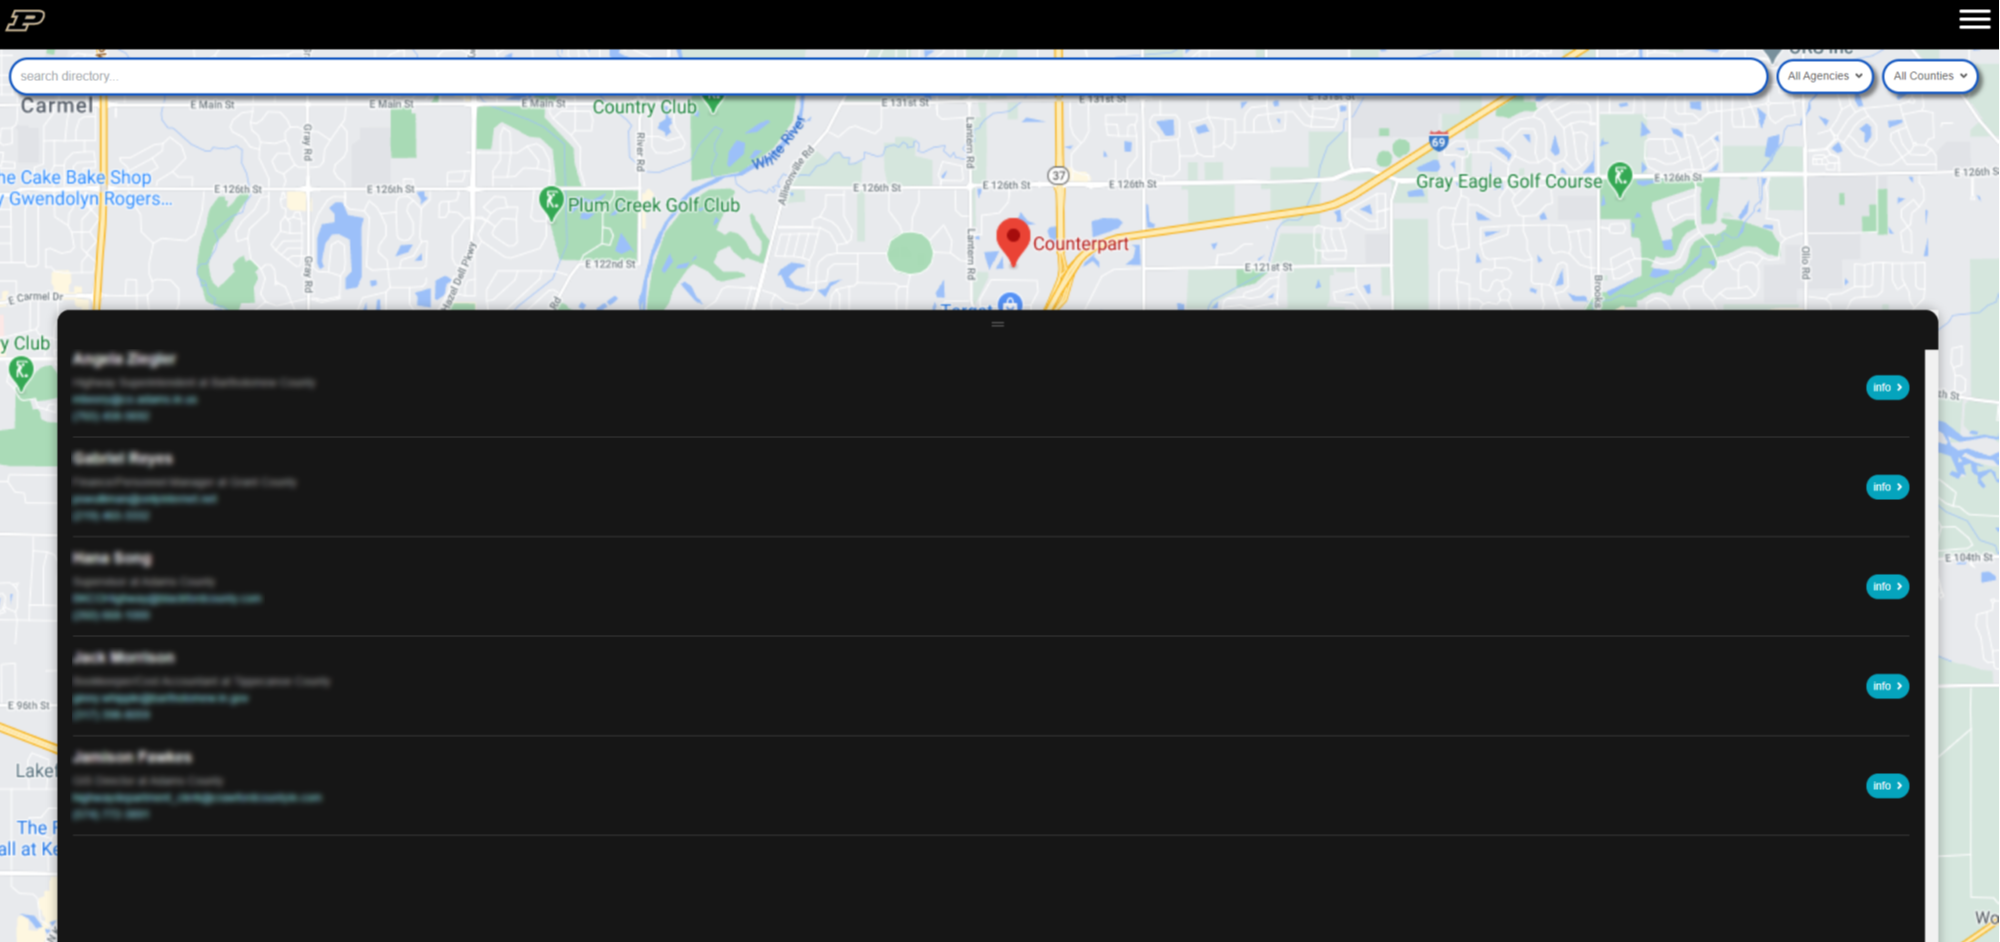 Image of App with map background and list of contacts in a black box.